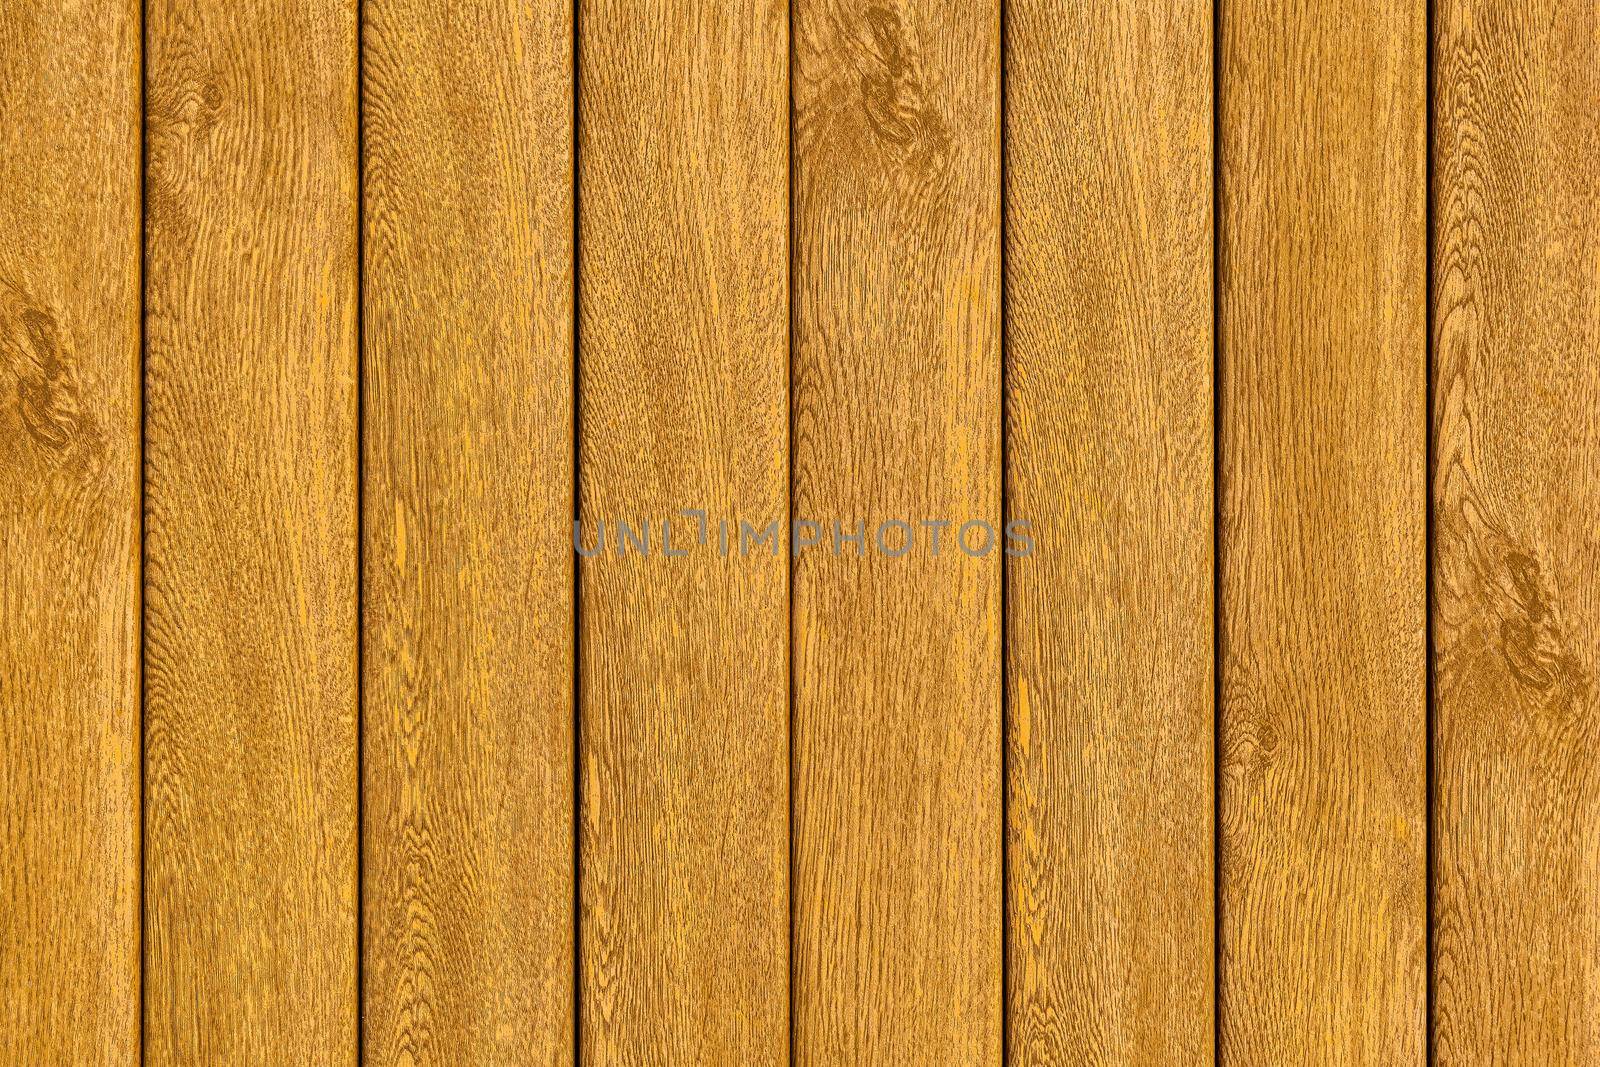 Plastic floorboards with wood decor vertically oriented by rostik924